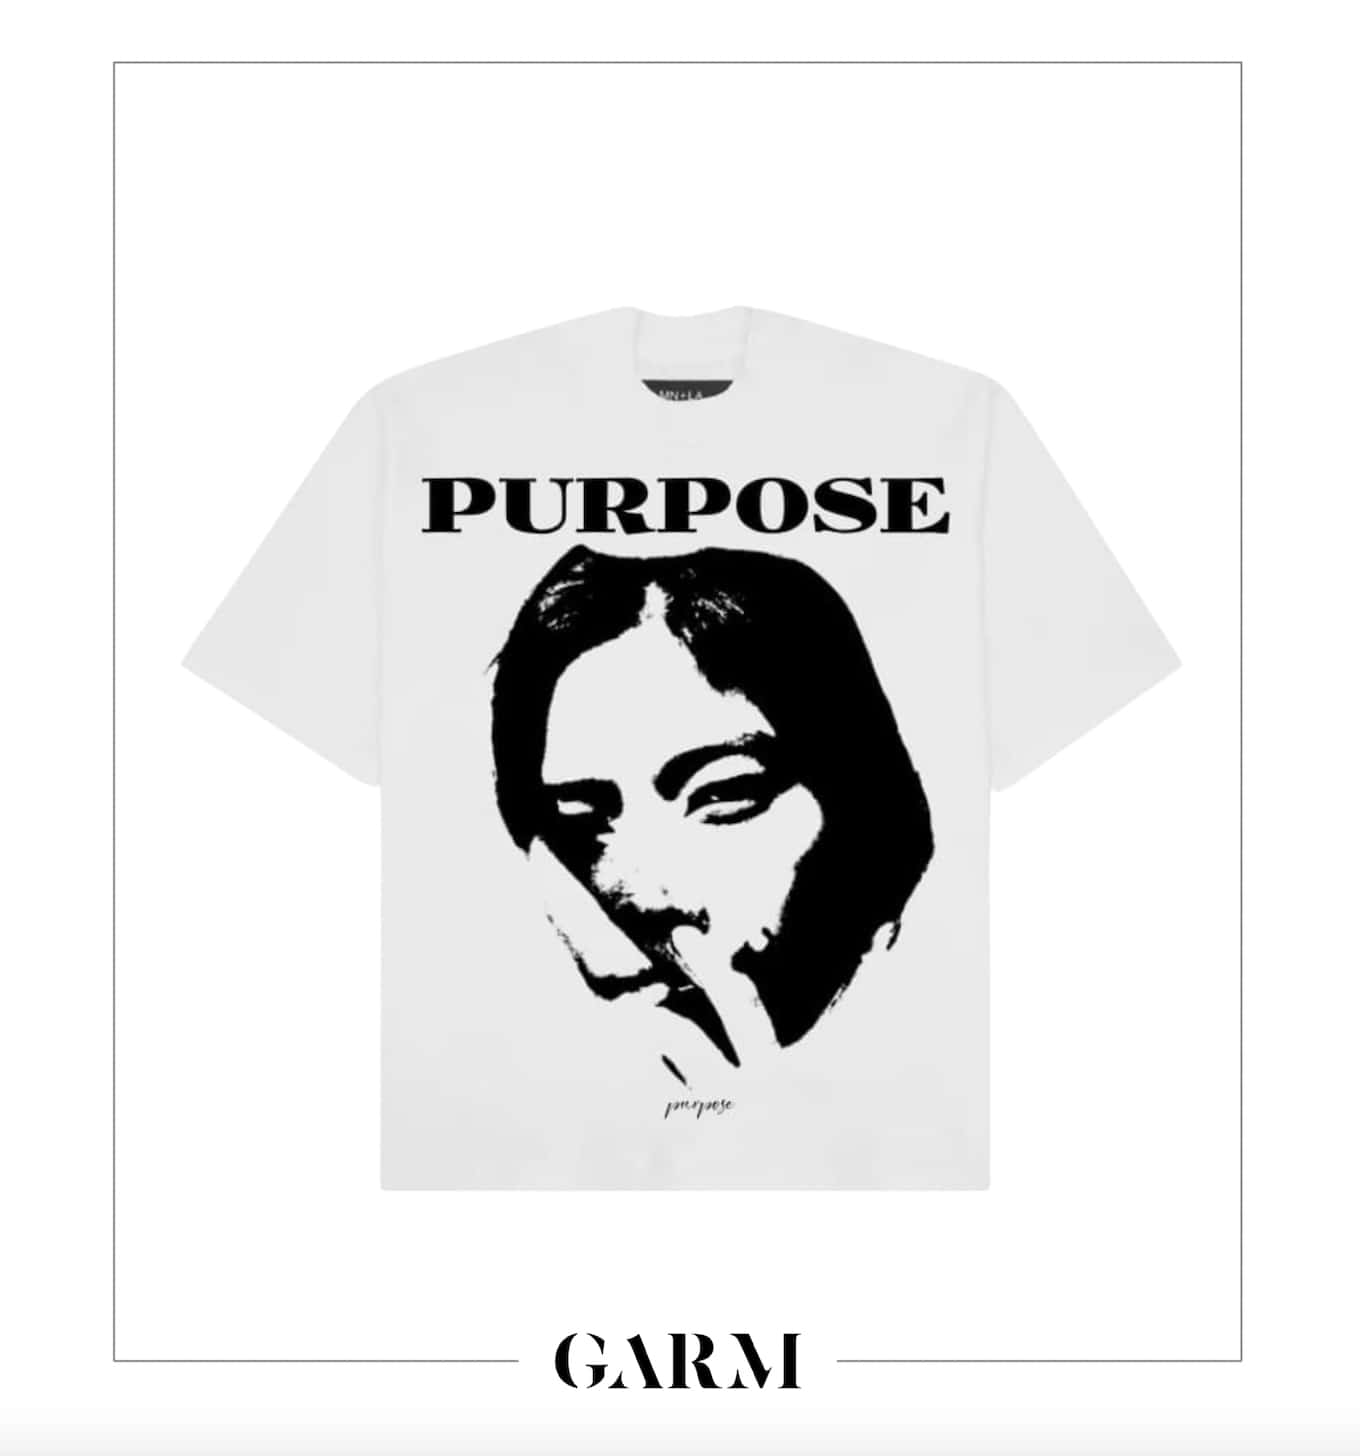 HER Purpose Apparel Tee by Purpose Apparel: White short-sleeved t-shirt with 'PURPOSE' above a graphic monochrome portrait, GARM logo at the bottom.